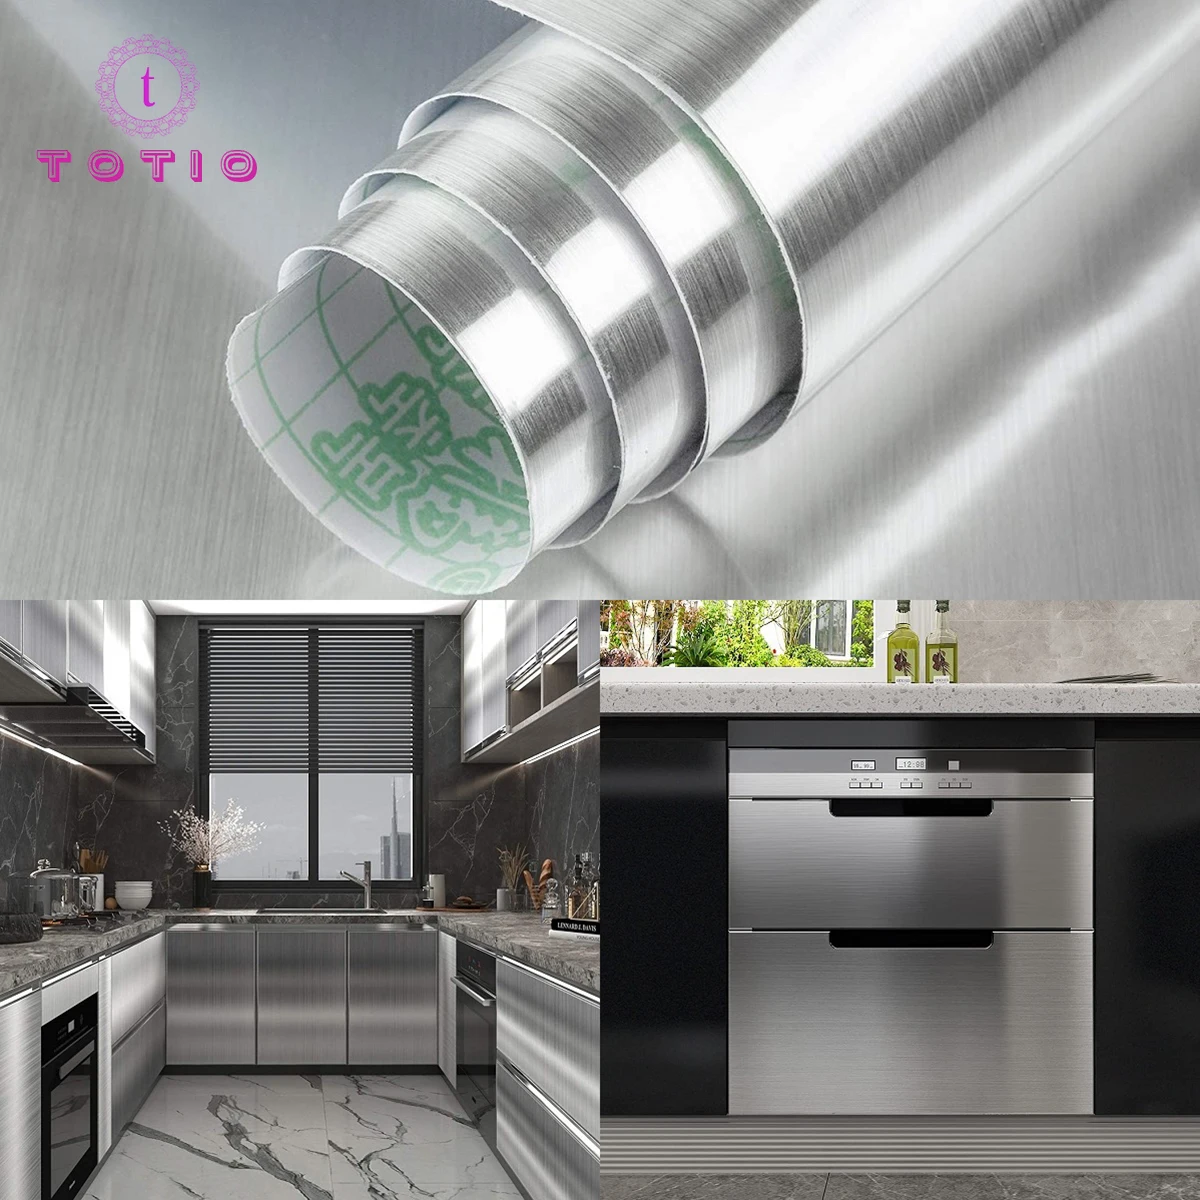 TOTIO Waterproof Silver Wallpaper Self Adhesive Stainless Steel Wallpaper Heat Resistance Vinyl Oilproof House Appliance Kitchen gold luxury trash can pedal stainless steel nordic style trash can kitchen 30 liter herramientas de limpieza house accessories